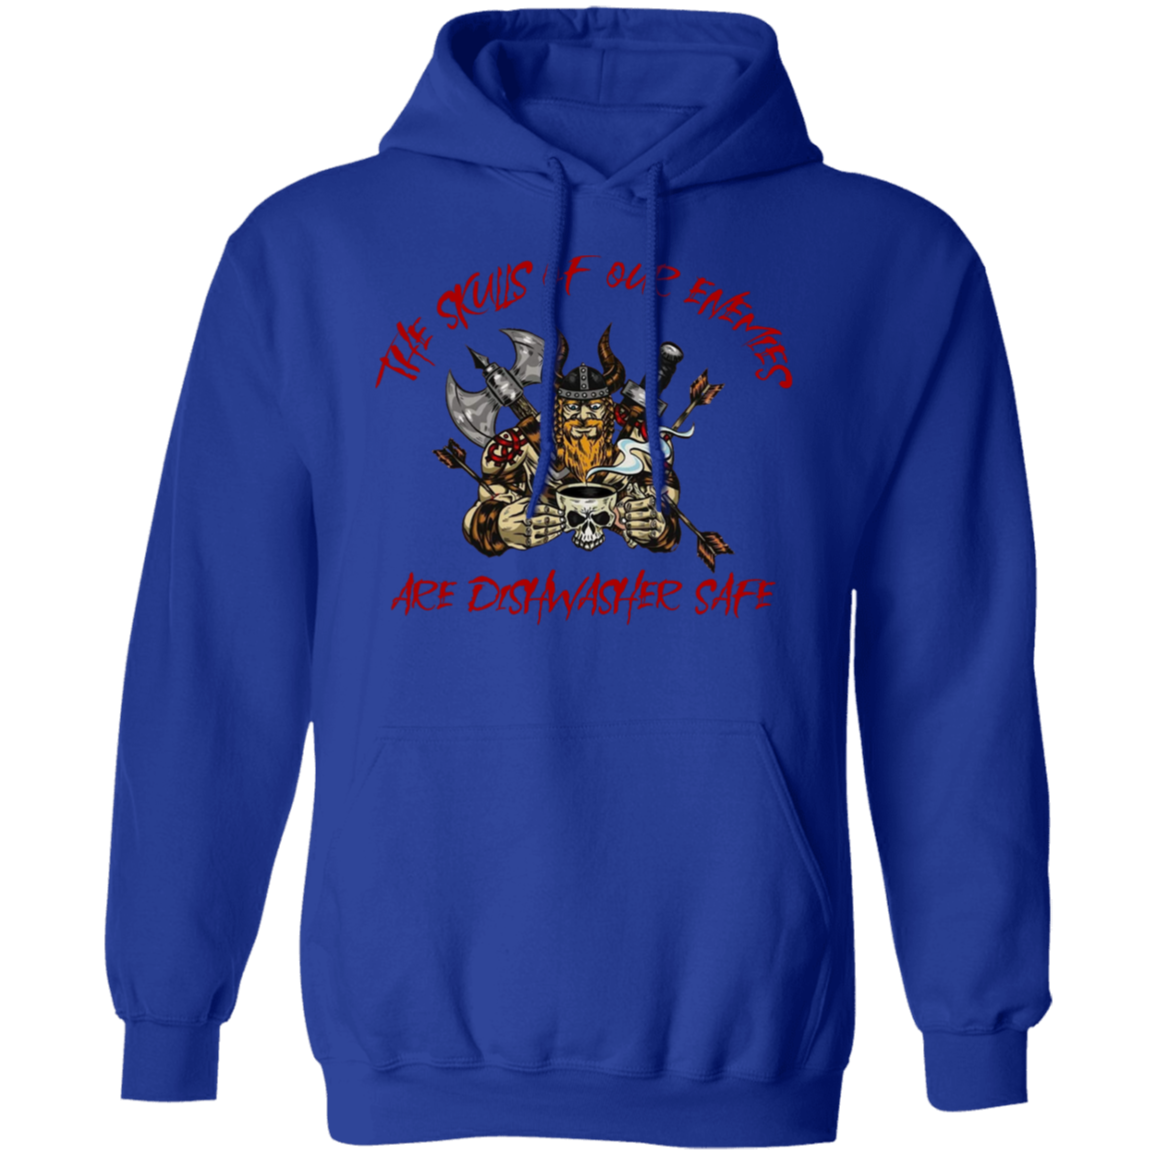 The Skulls of Our Enemies Are Dishwasher Safe Pullover Hoodie